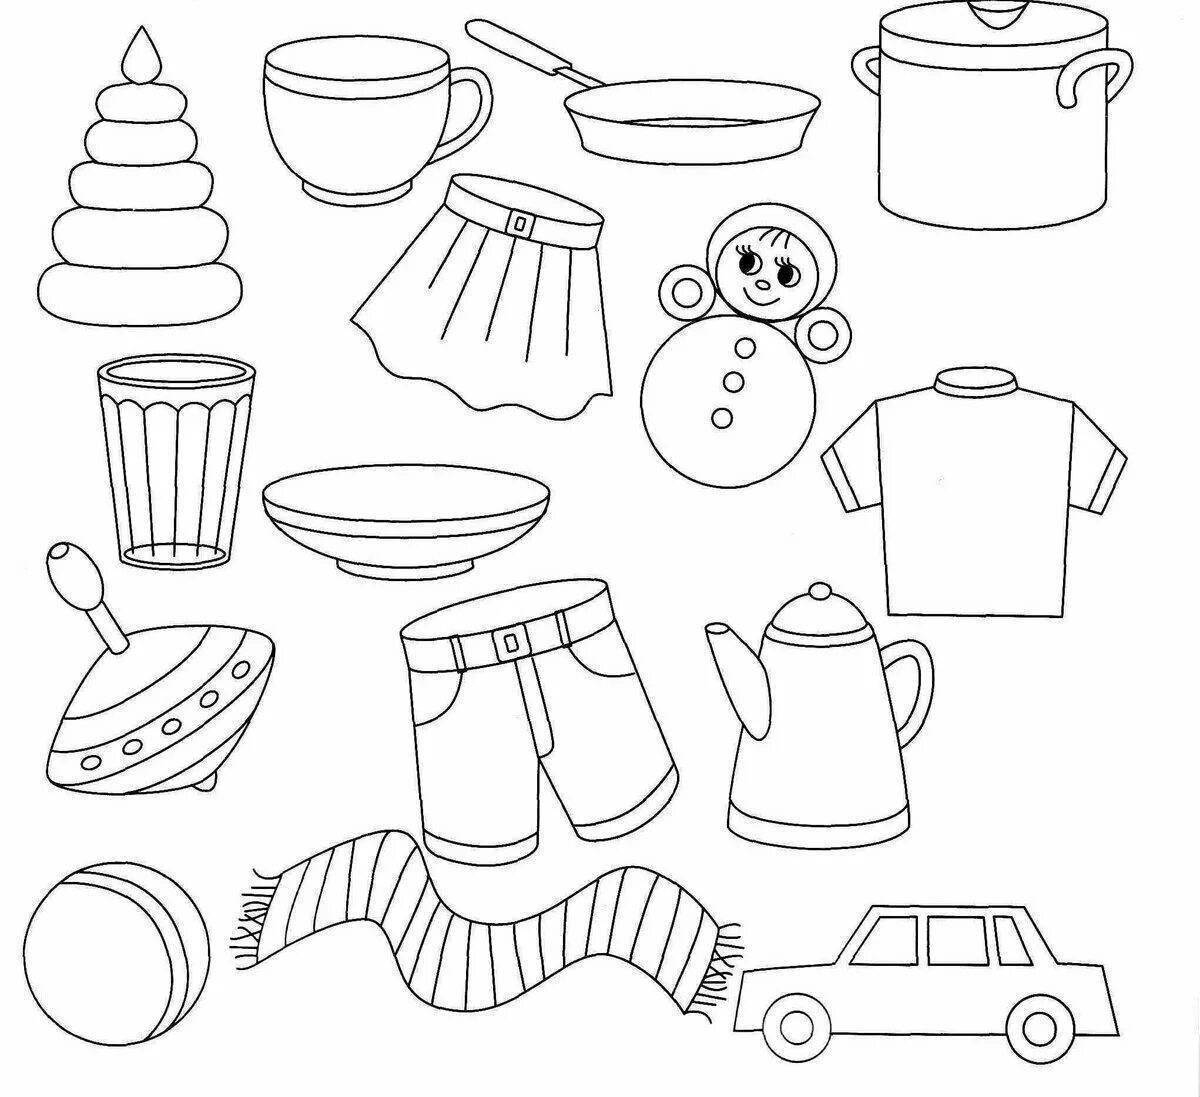 Colouring holiday wooden toys